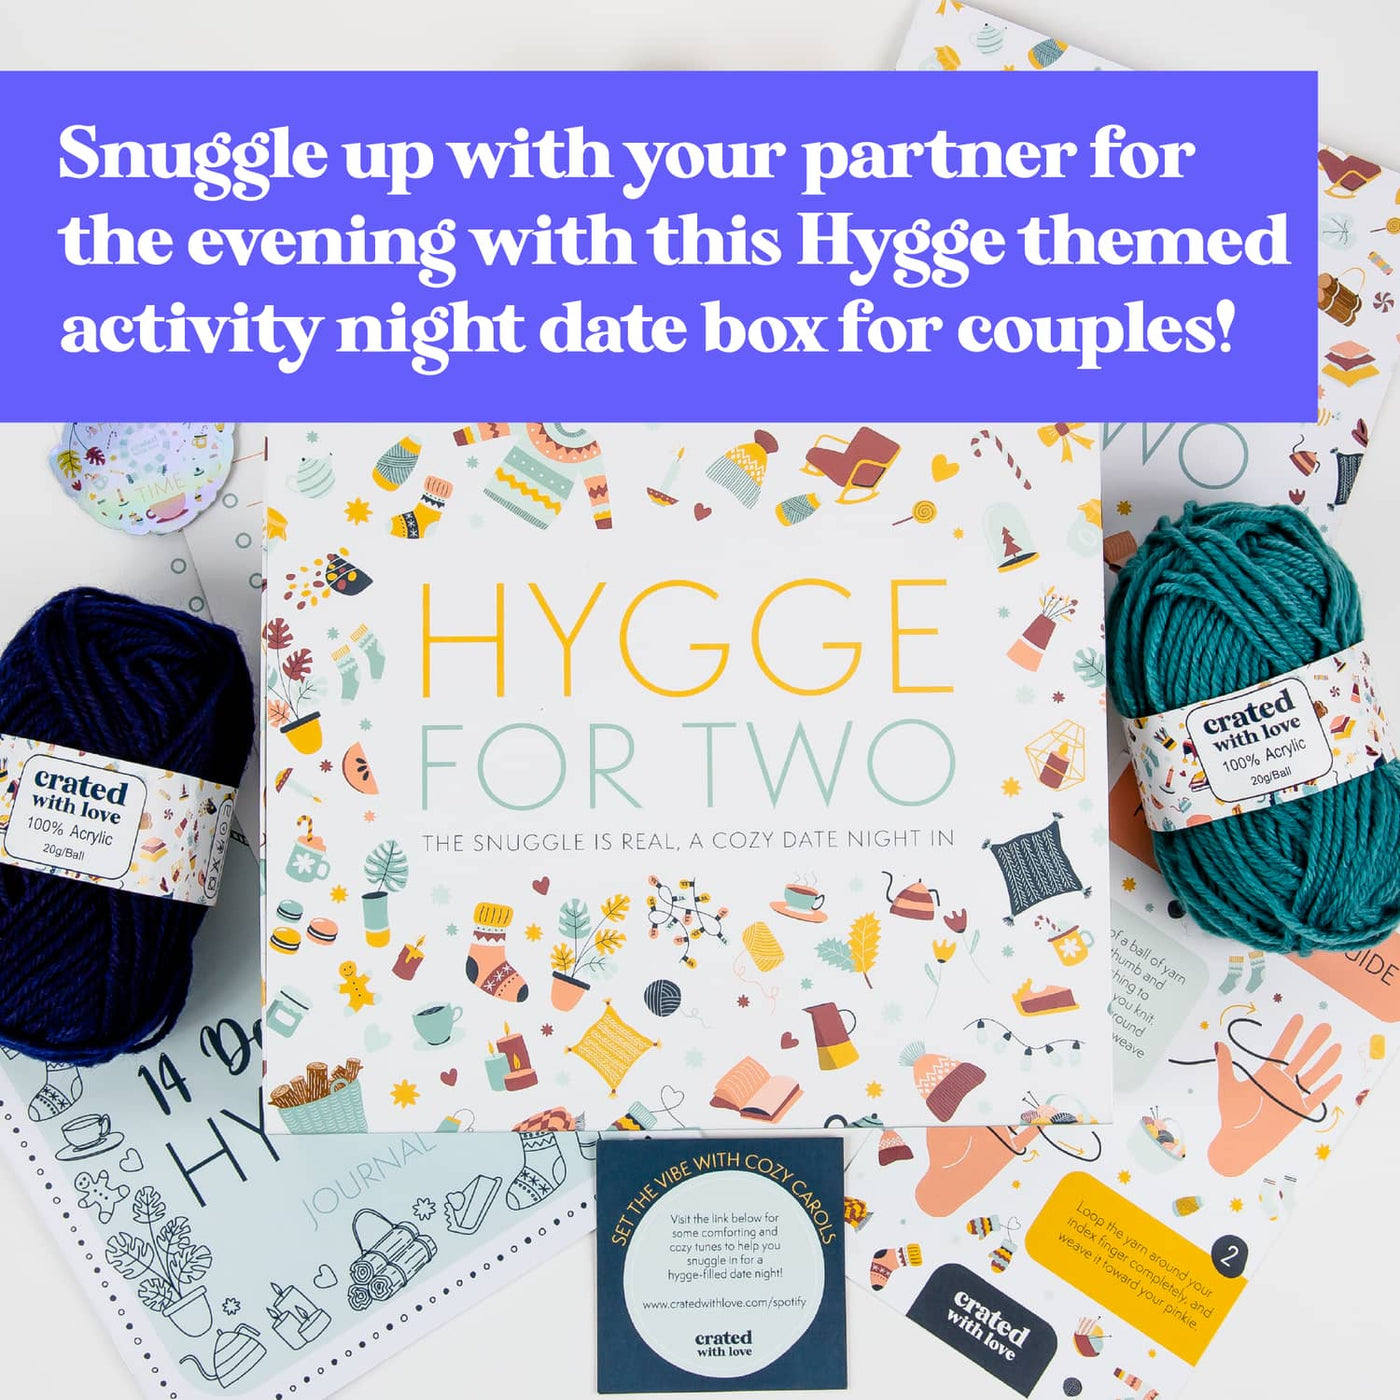 Hygge for Two by Crated with Love